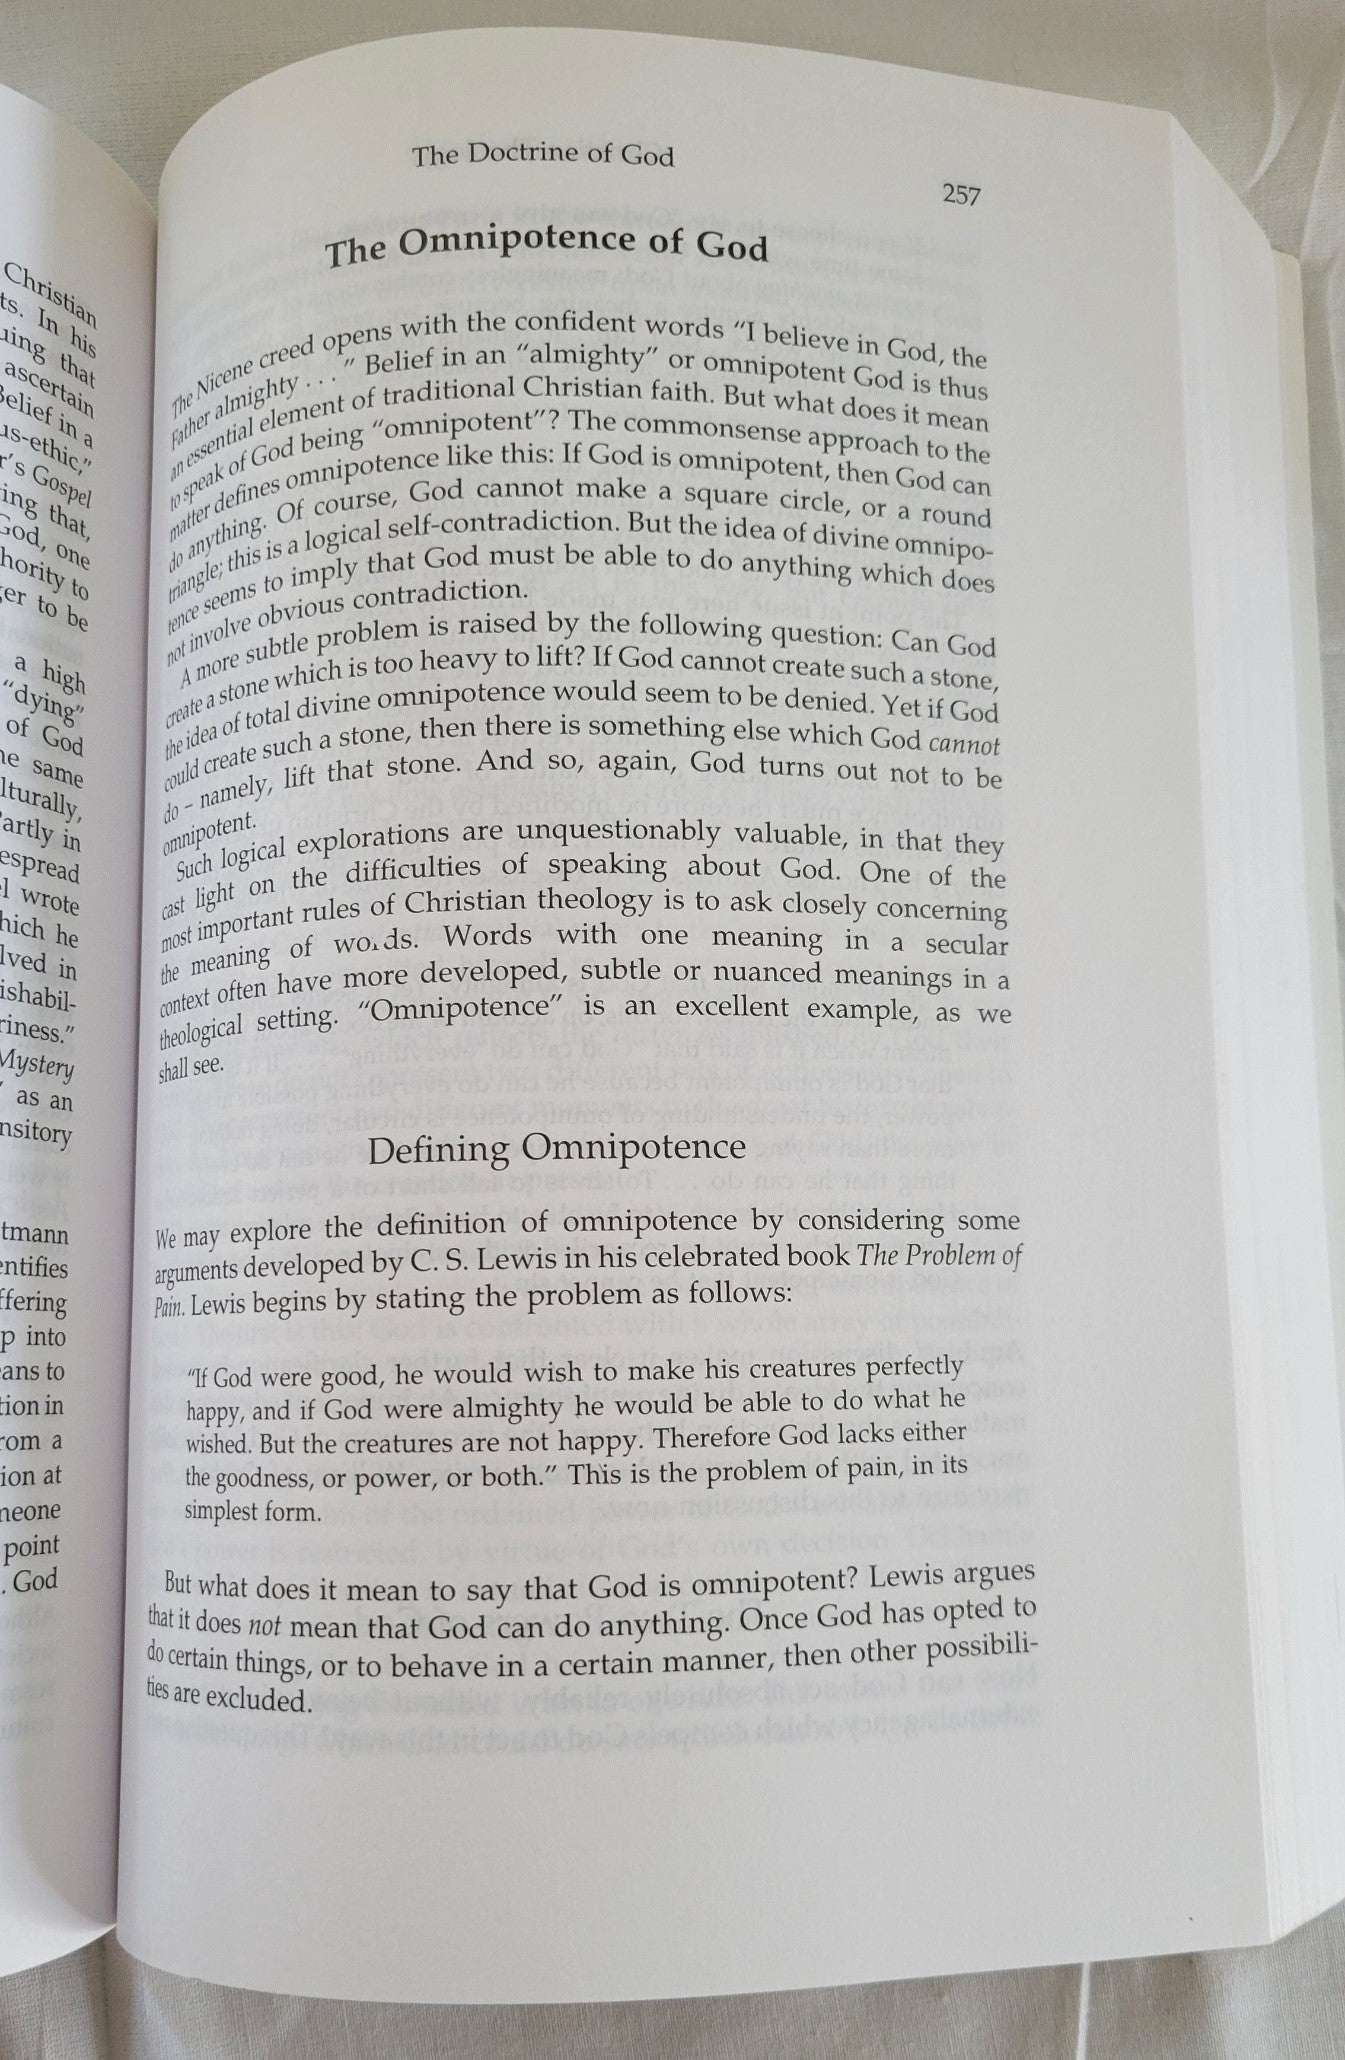 Used book. Christian Theology: An Introduction, Second Edition written by Alister McGrath, published by Blackwell Publishers.  View of page 257.